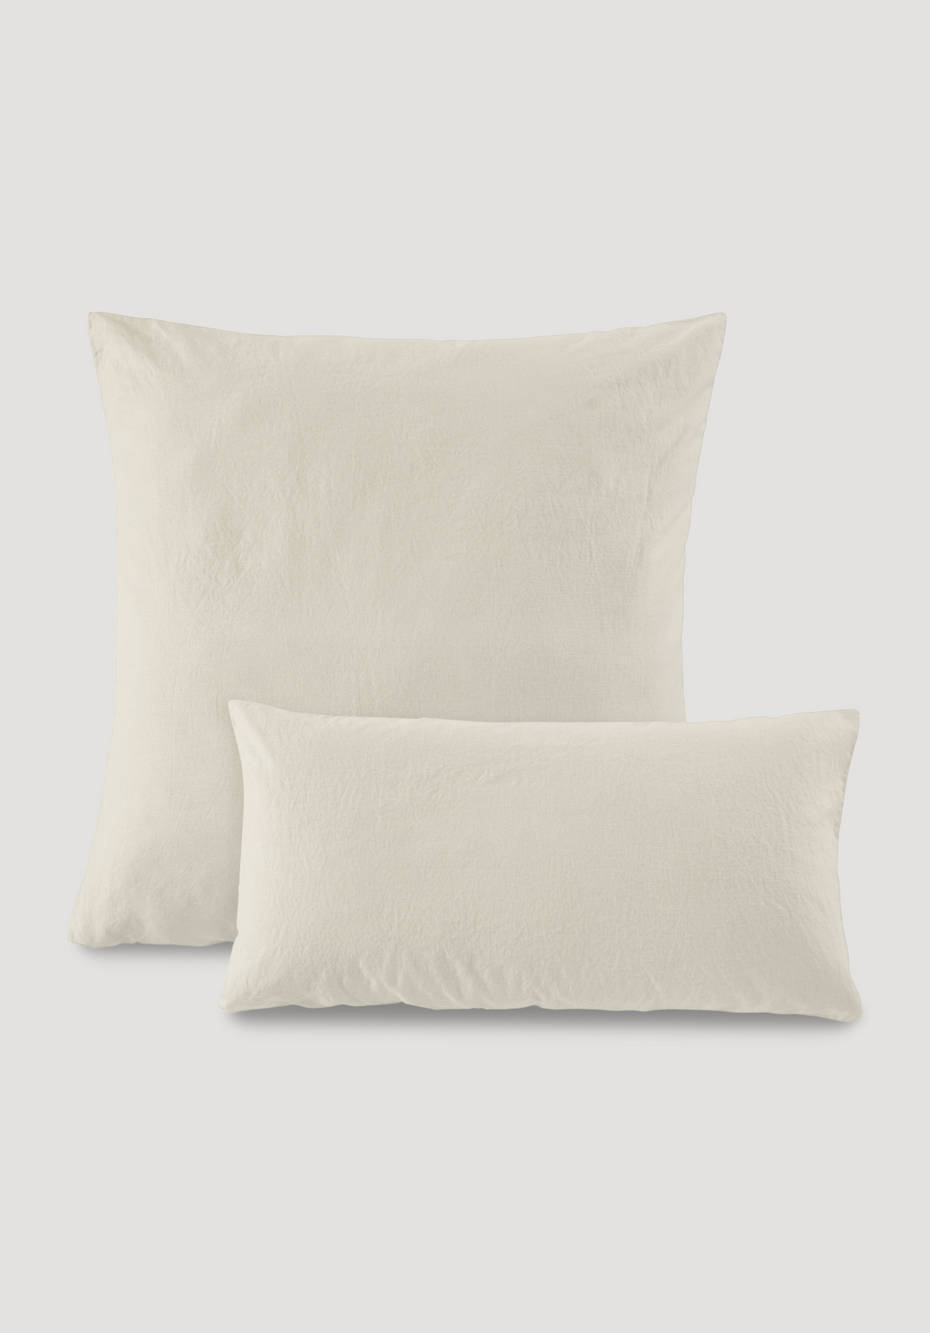 Cushion cover made from pure organic linen